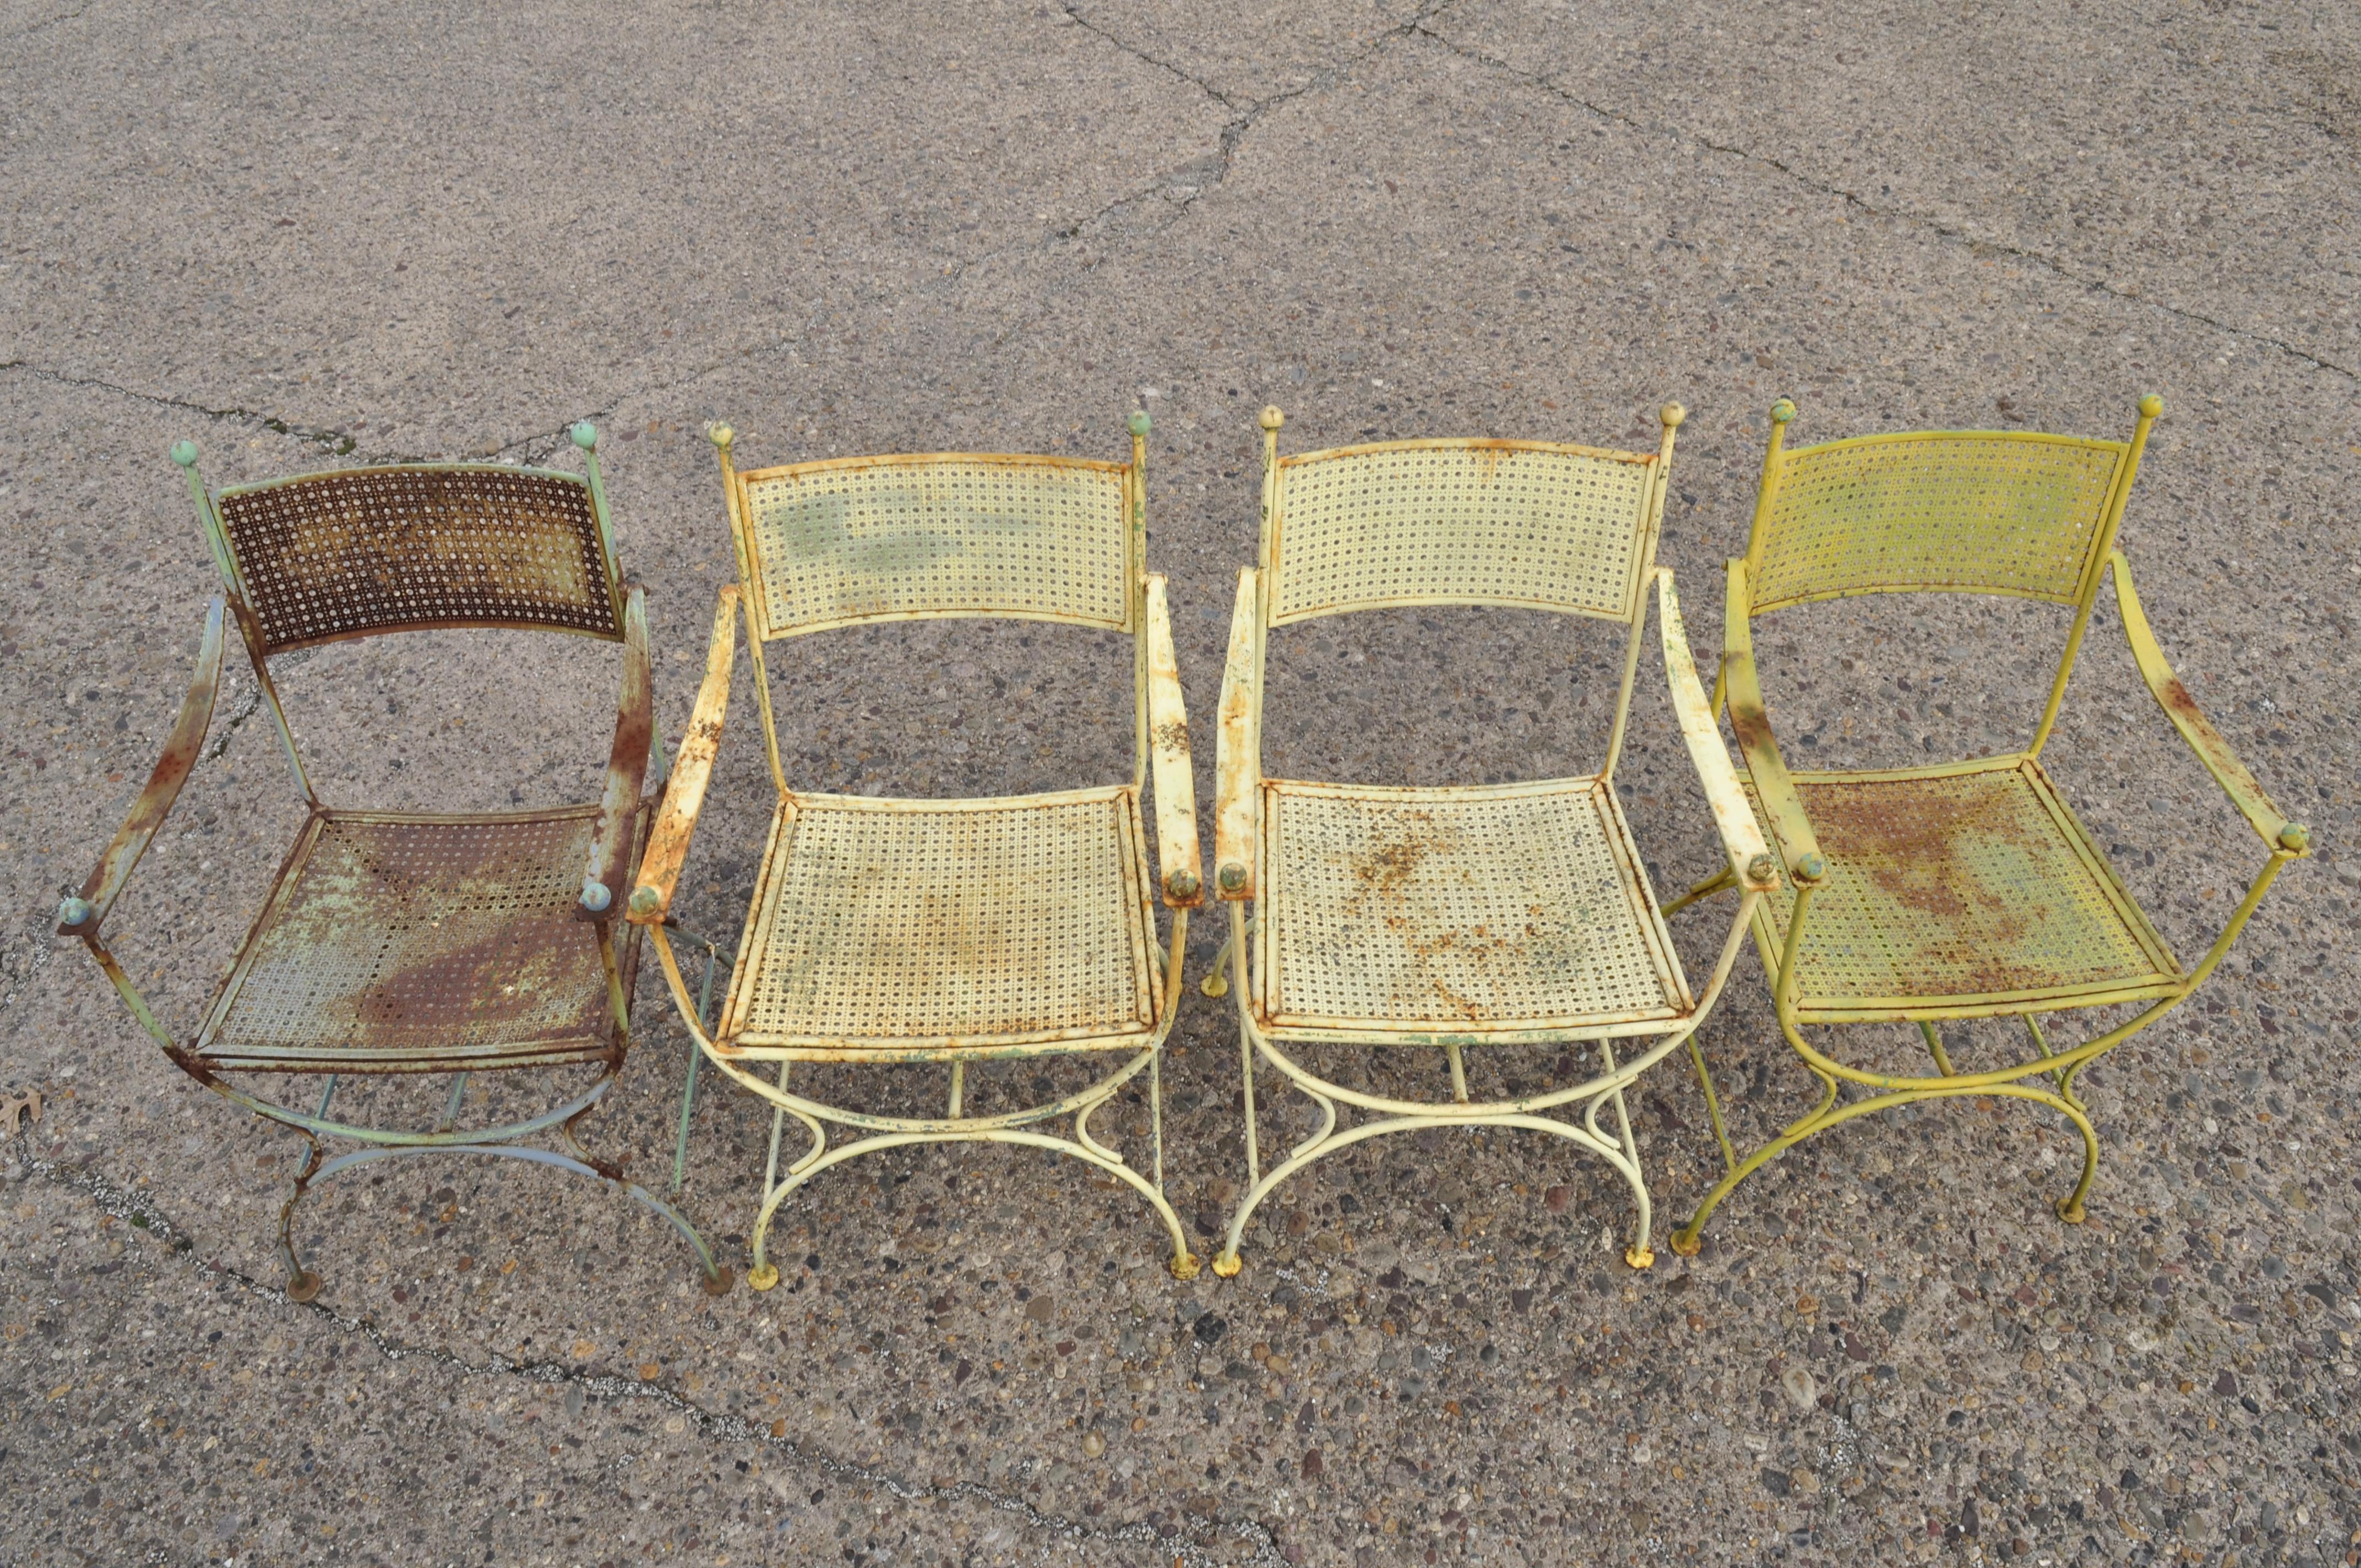 Set of 4 vintage wrought iron curule X-frame garden patio dining armchairs. Listing includes curule X-frame base, metal mesh seats and backs, (4) armchairs, wrought iron construction, very nice vintage item, great style and form, circa mid-20th